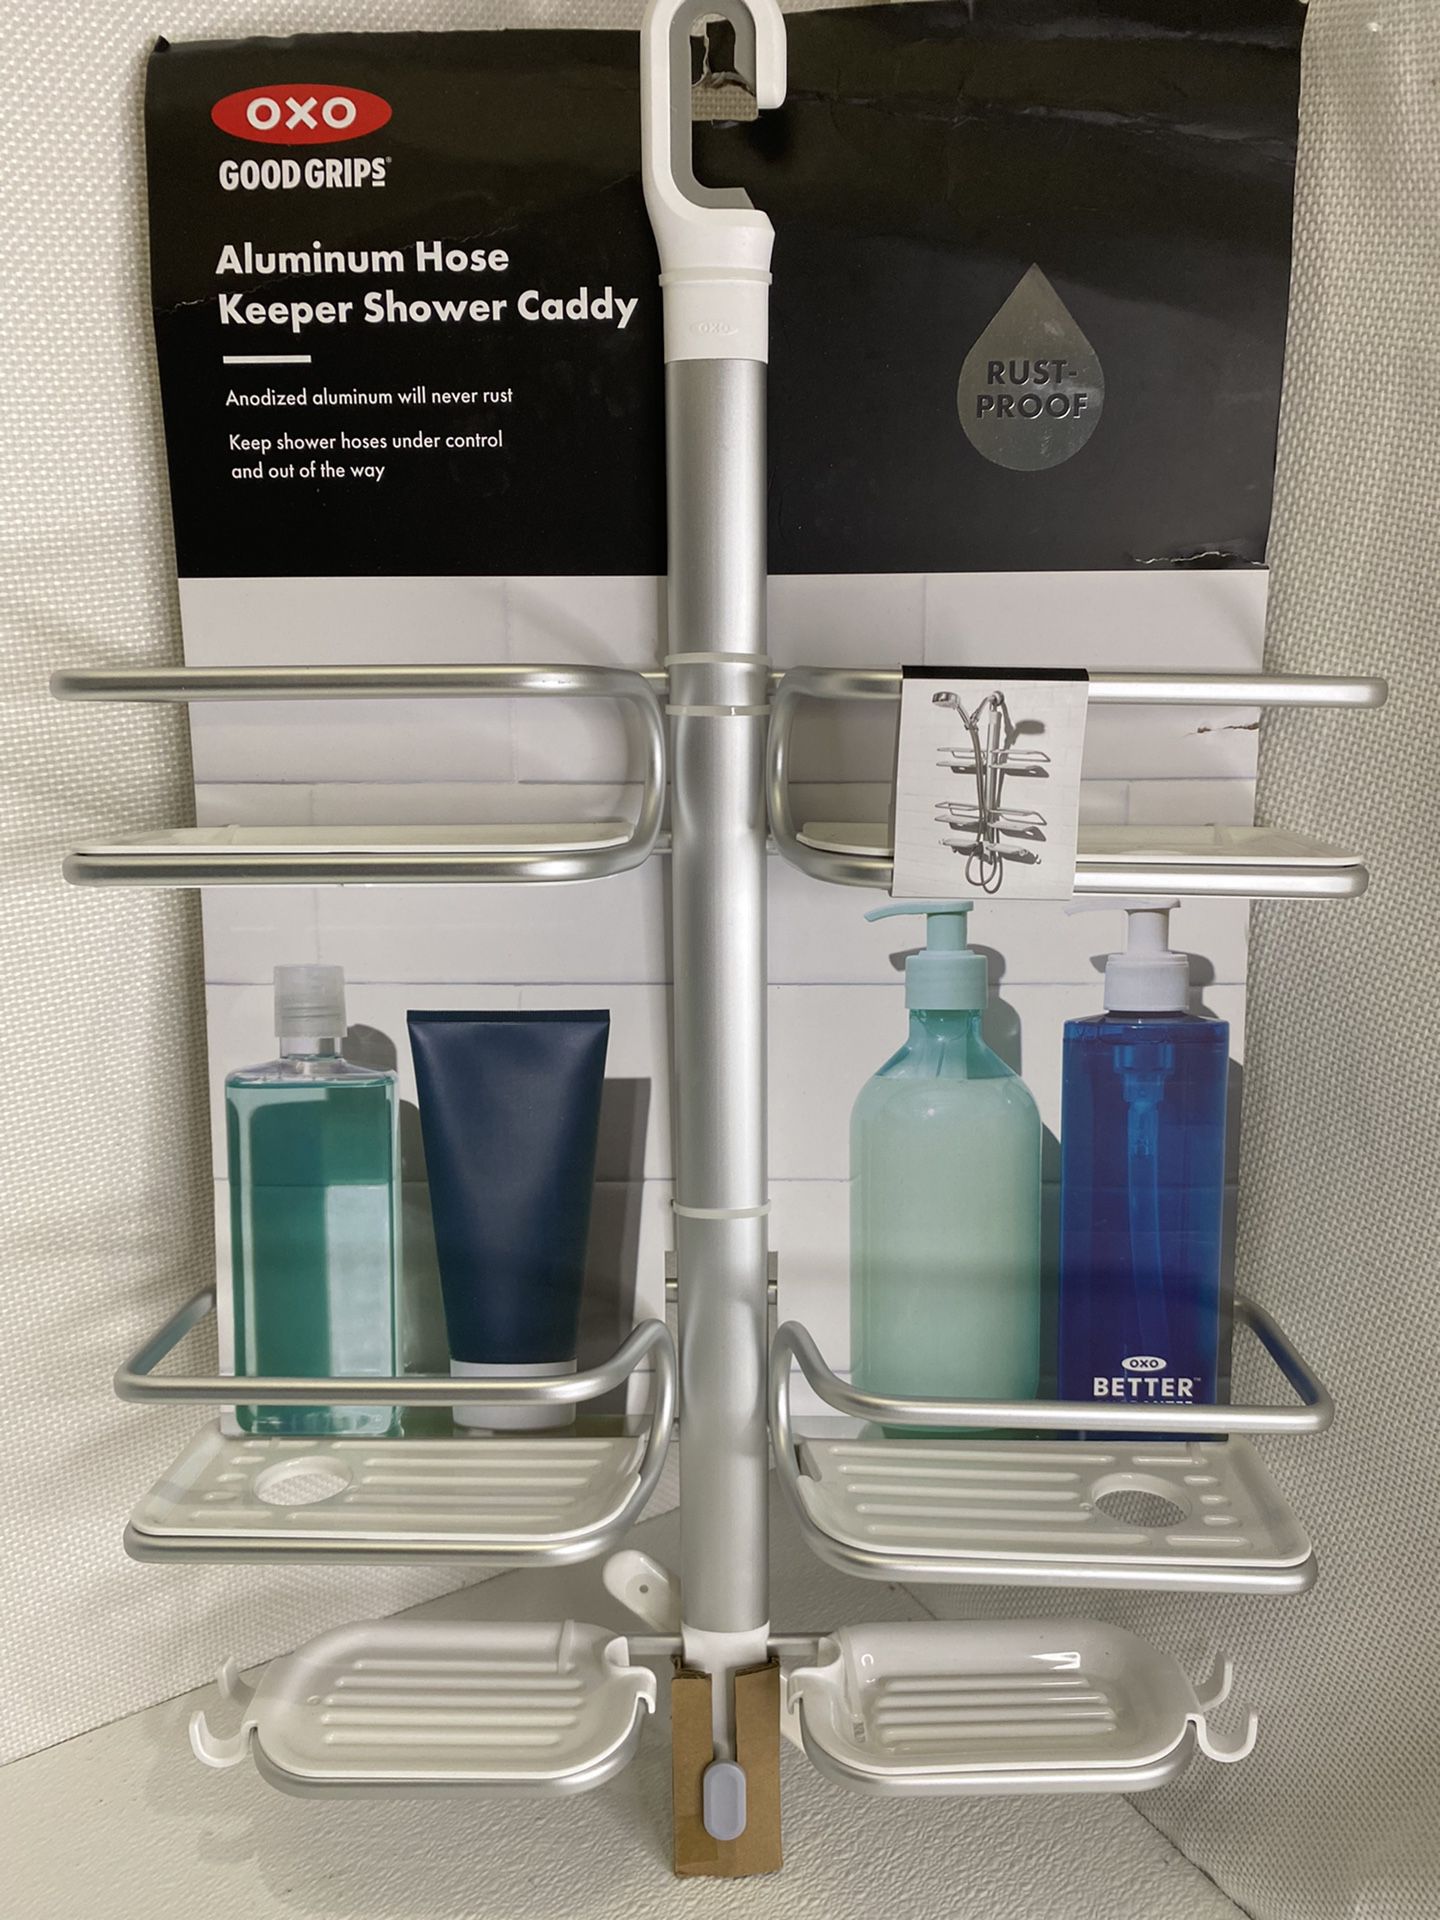 OXO Good Grips Aluminum Hose Keeper Shower Caddy for Sale in